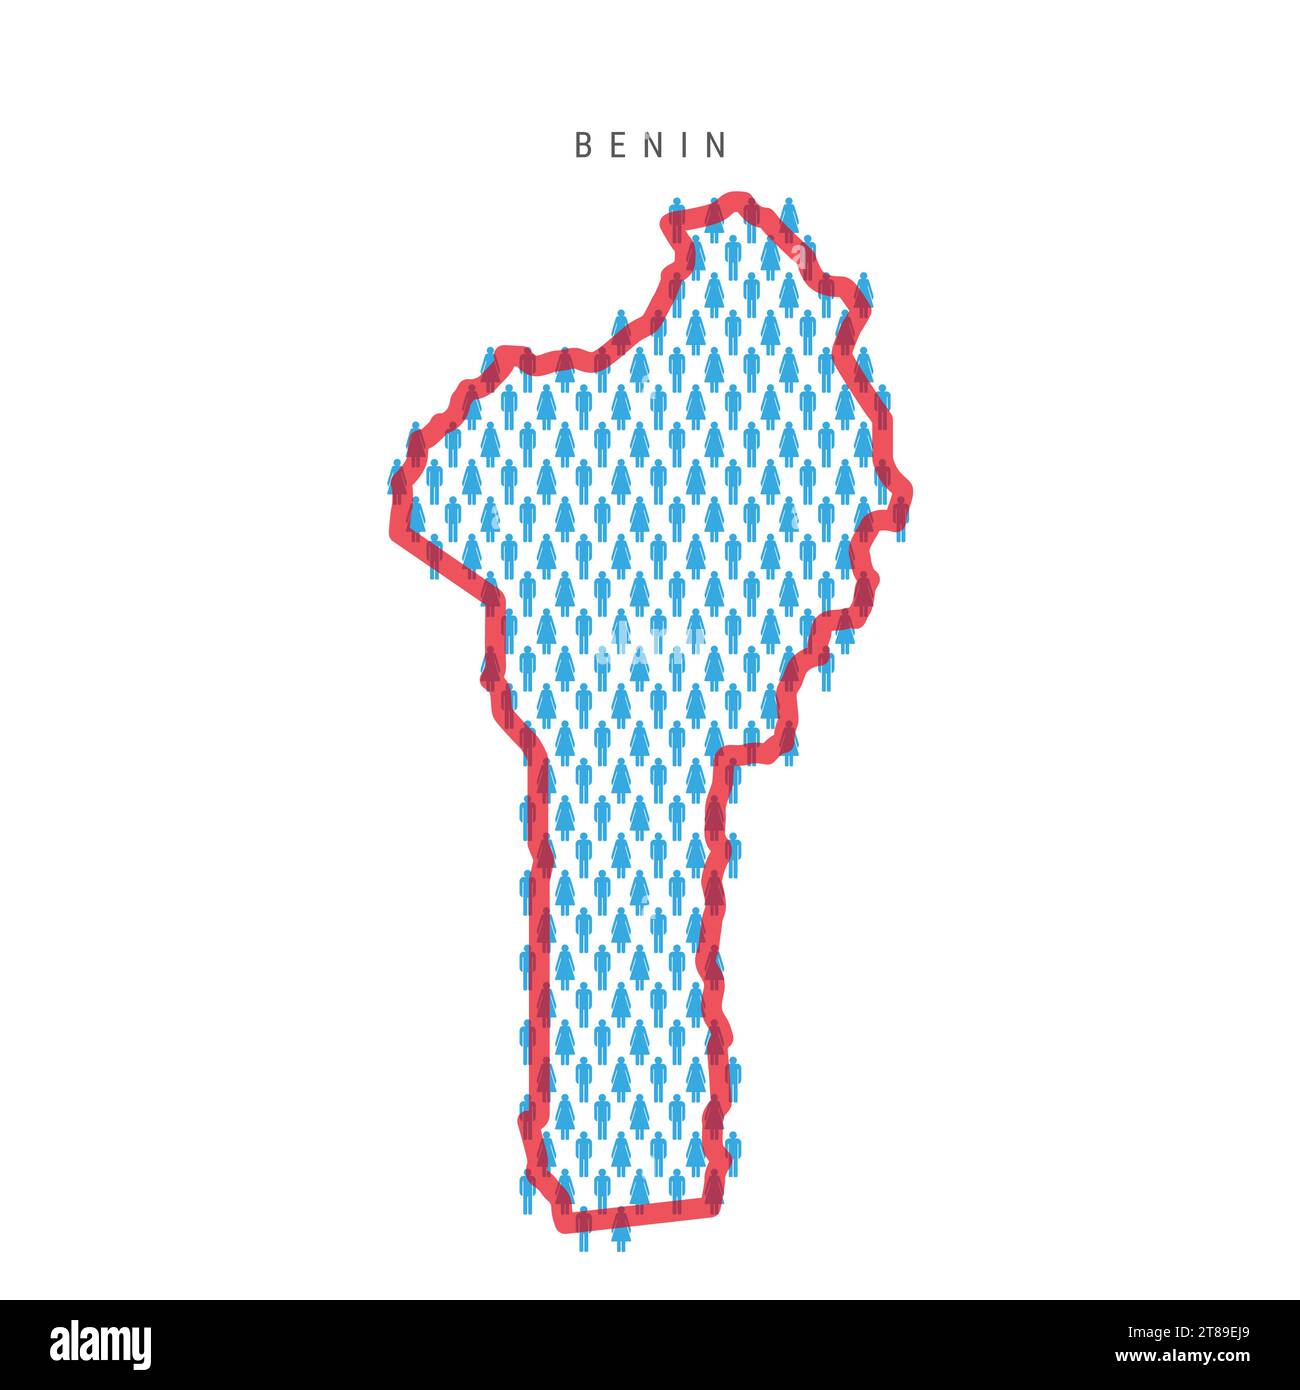 Benin population map. Stick figures Dahomey people map with bold red translucent country border. Pattern of men and women icons. Isolated vector illus Stock Vector